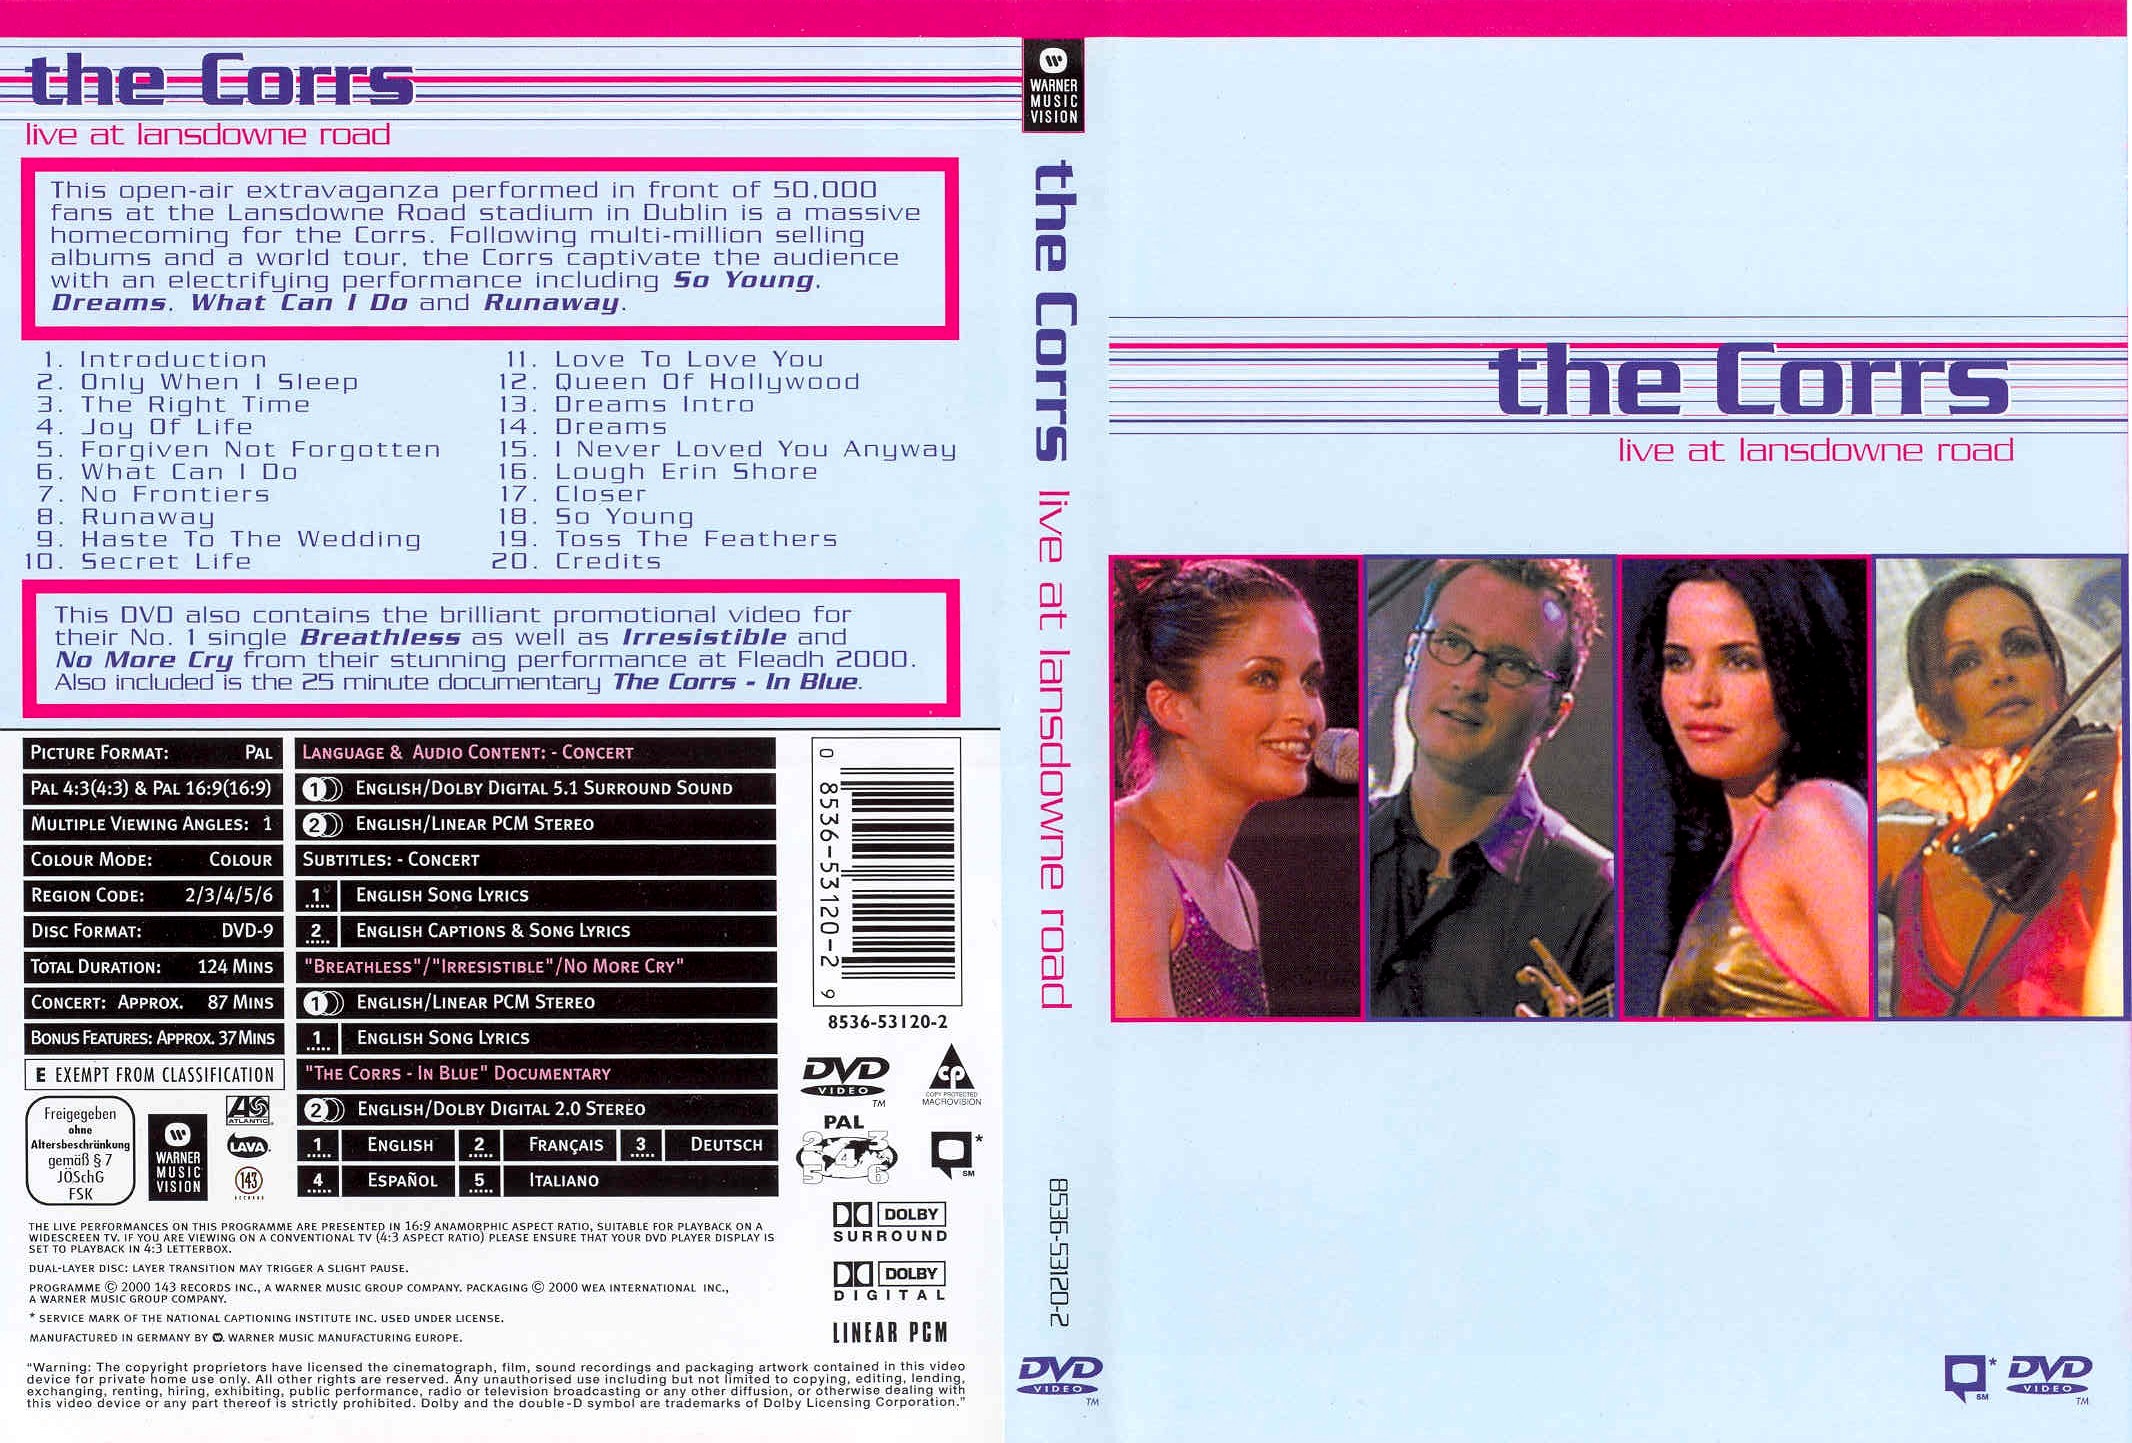 Jaquette DVD The Corrs - Live at Landsowne Road